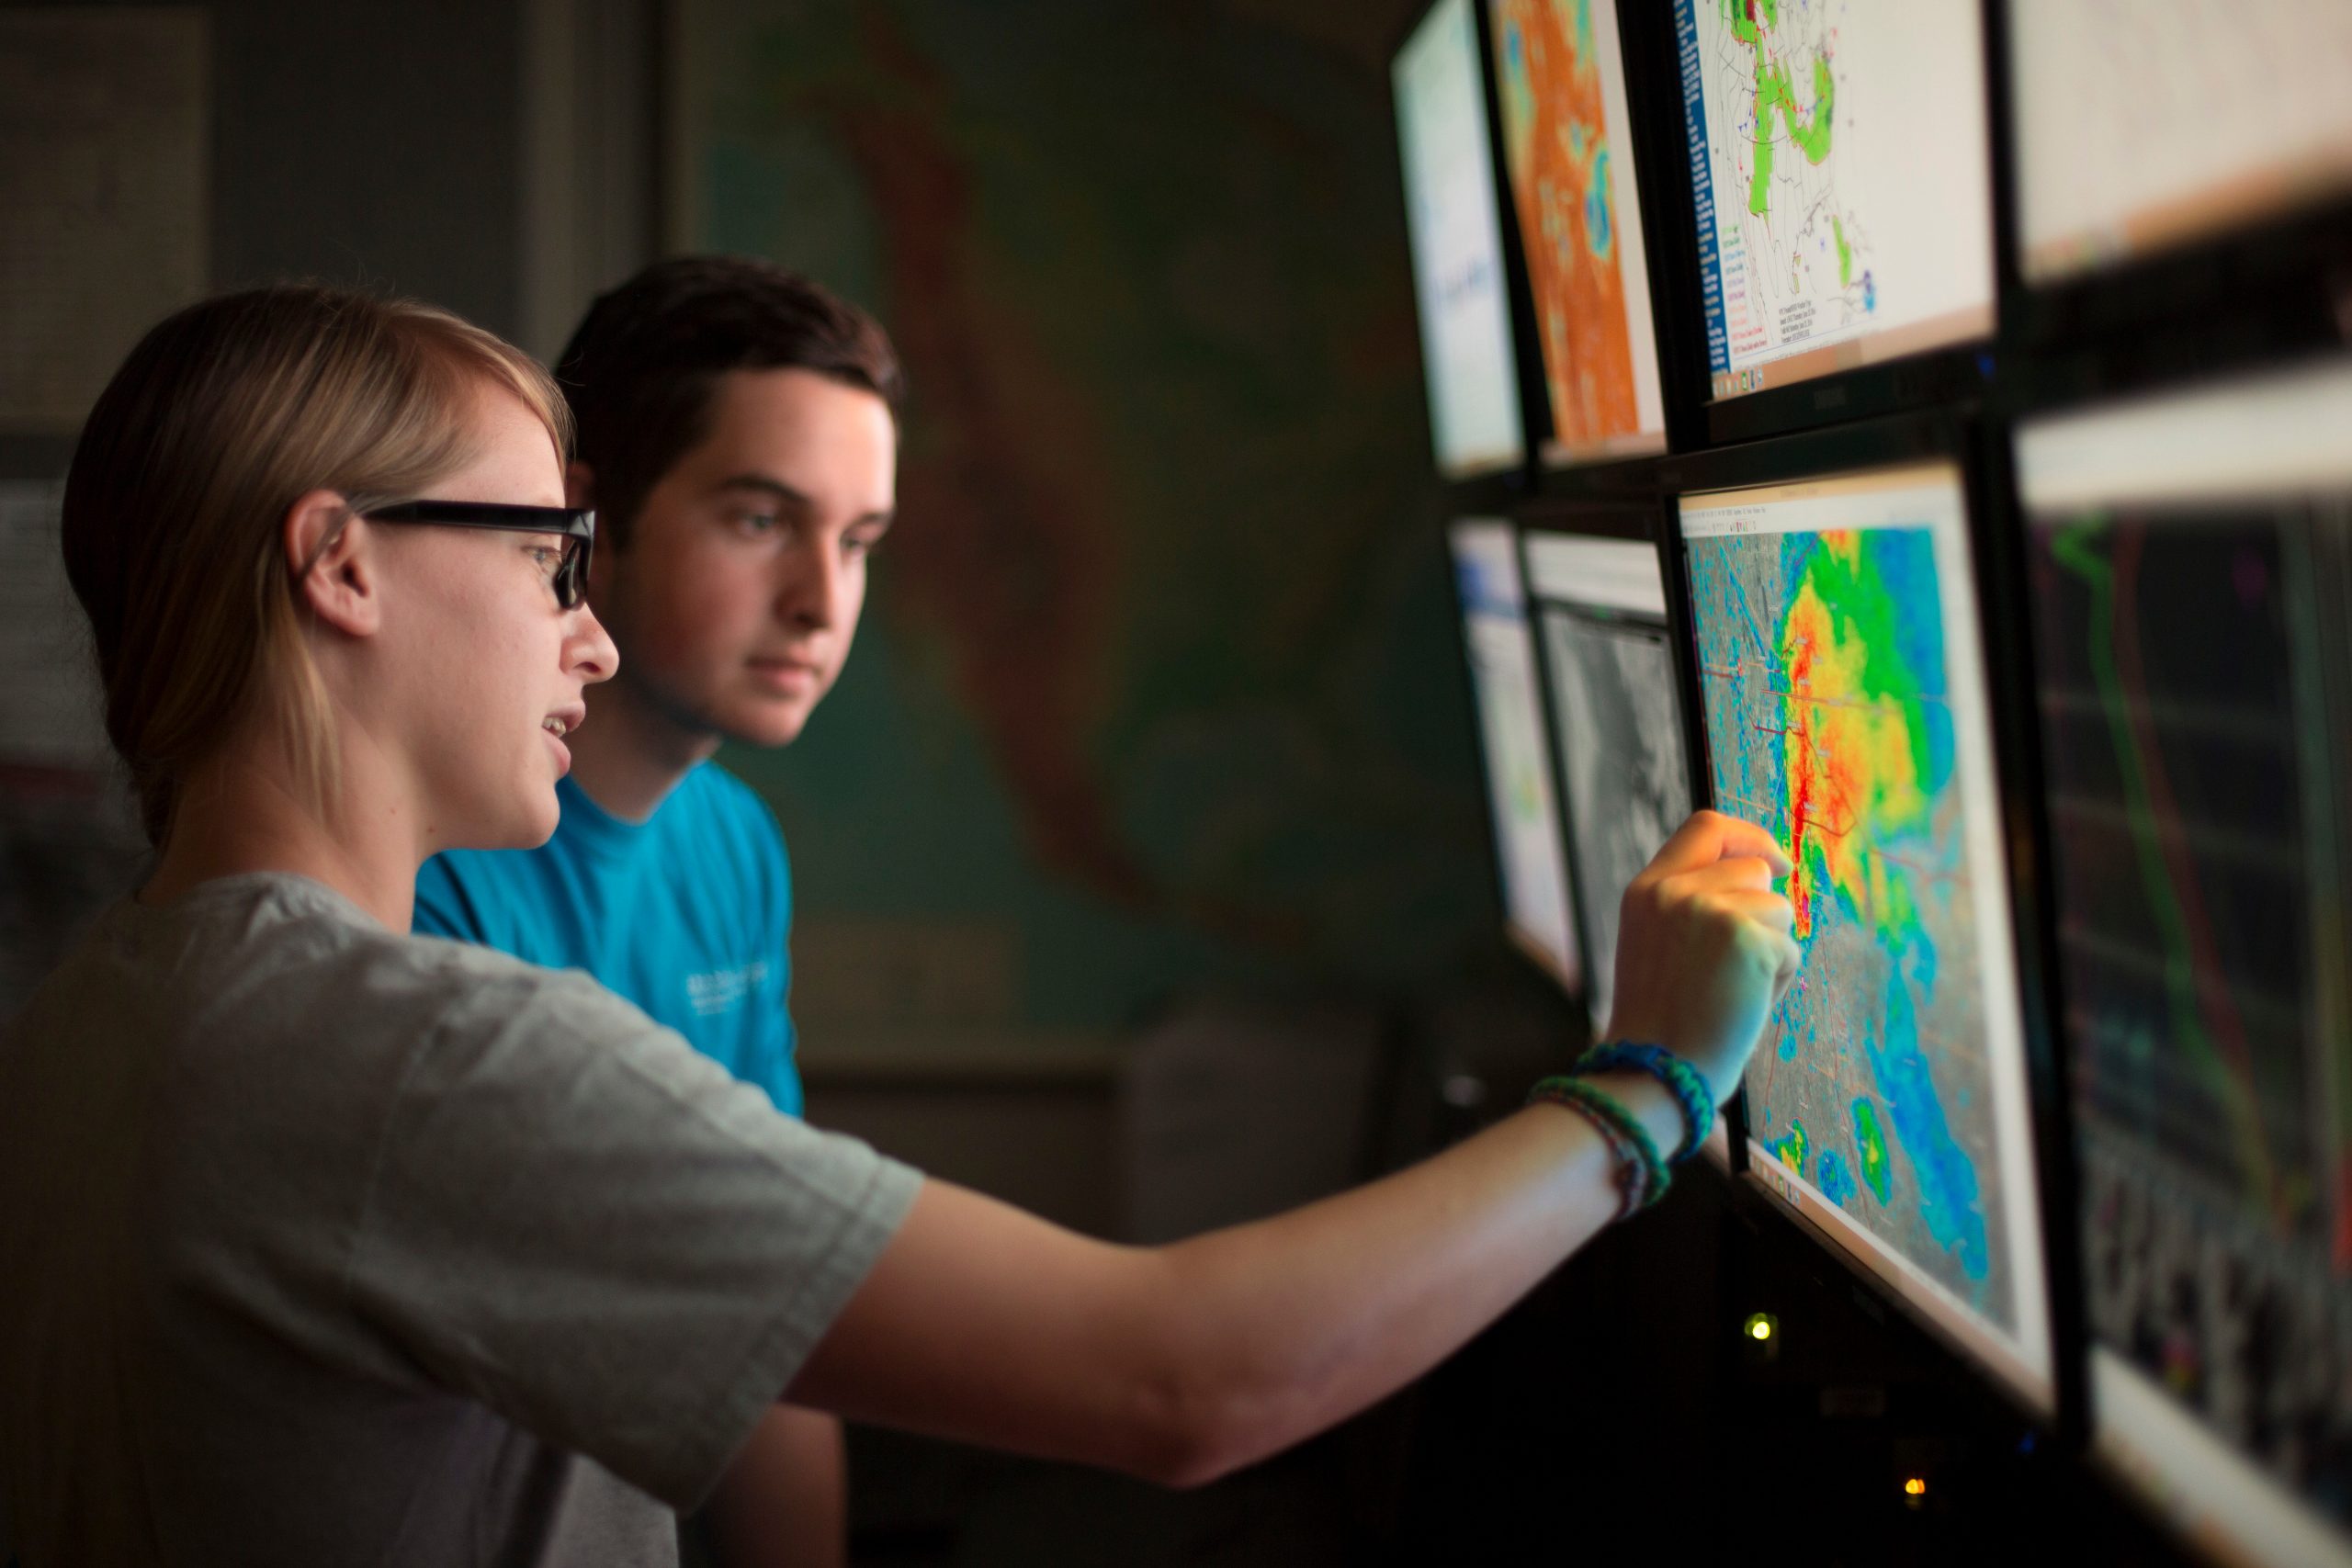 Meteorology faculty and students in front of screens showing radar